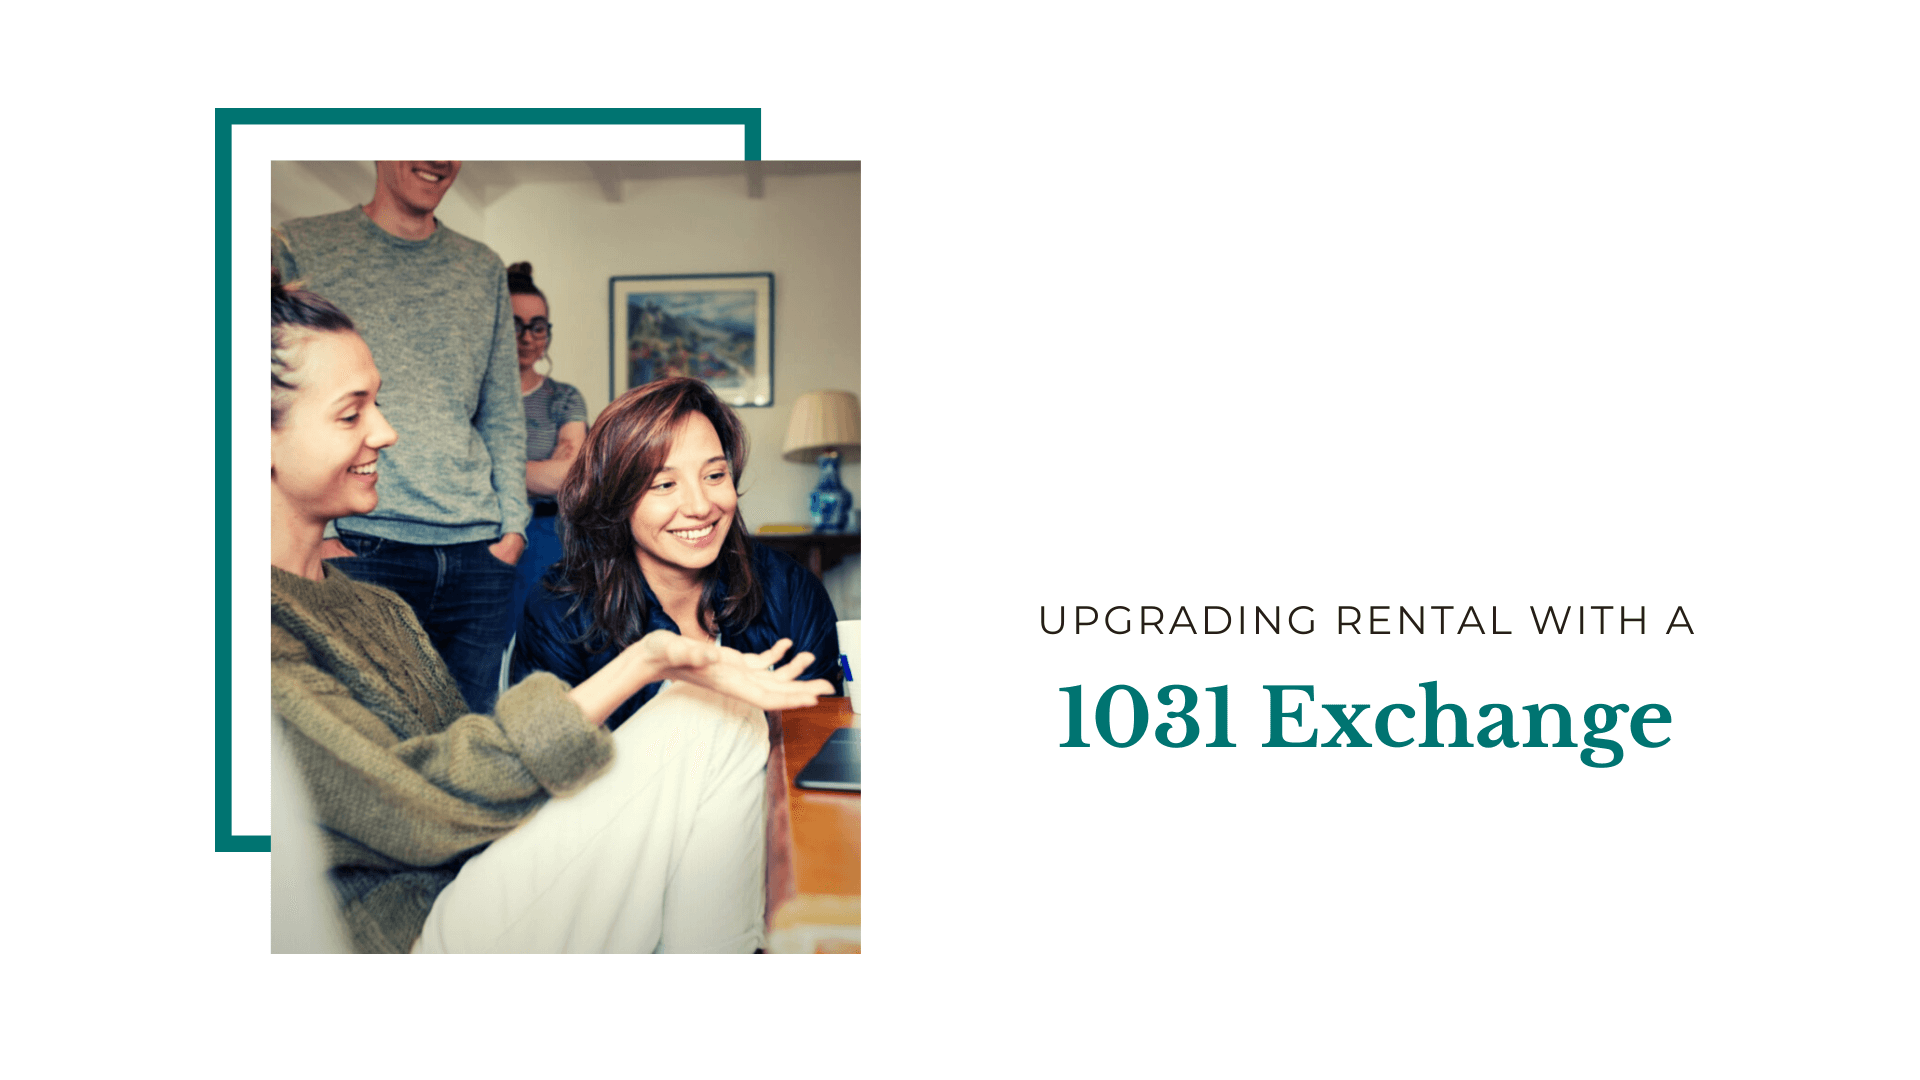 Is it Time to Upgrade My Seattle Rental Property with a 1031 Exchange?